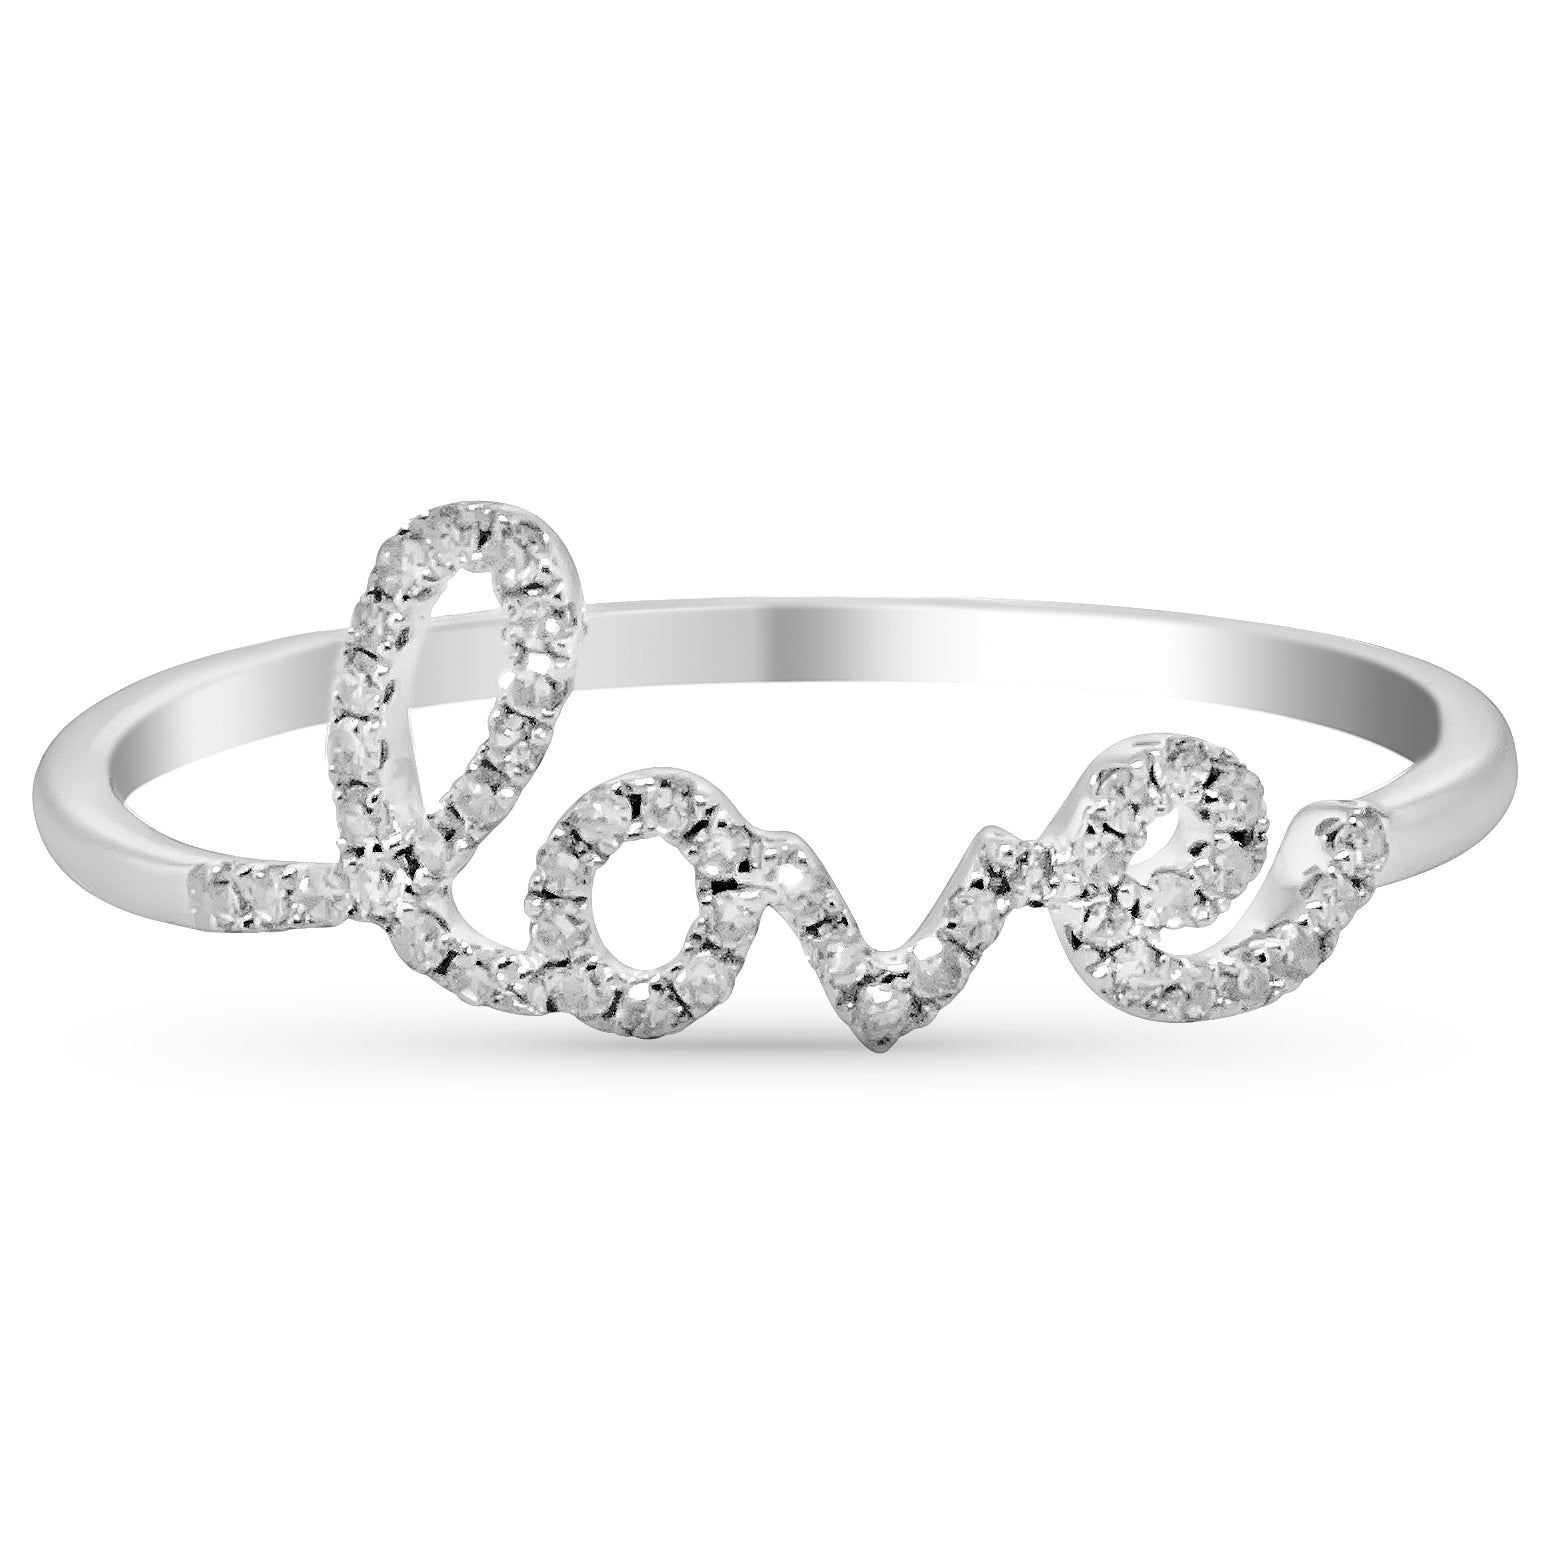 0.13 CTS Diamond "Love" Fashion Ring Set in 14KT White Gold